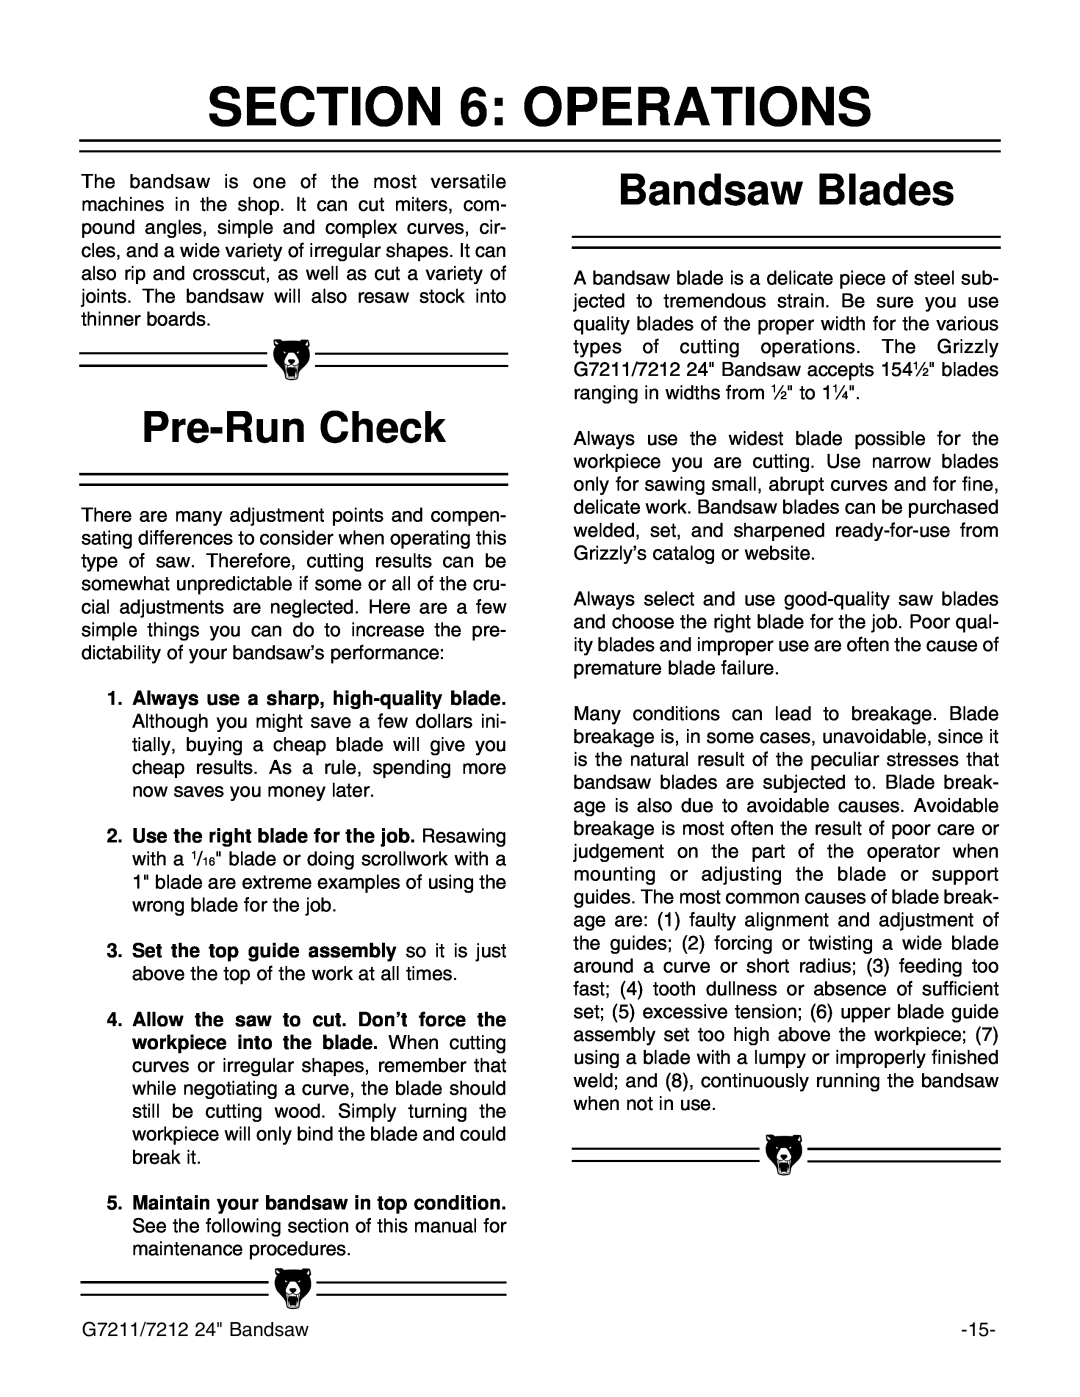 Grizzly G7211, G7212 instruction manual Operations, Pre-Run Check, Bandsaw Blades 